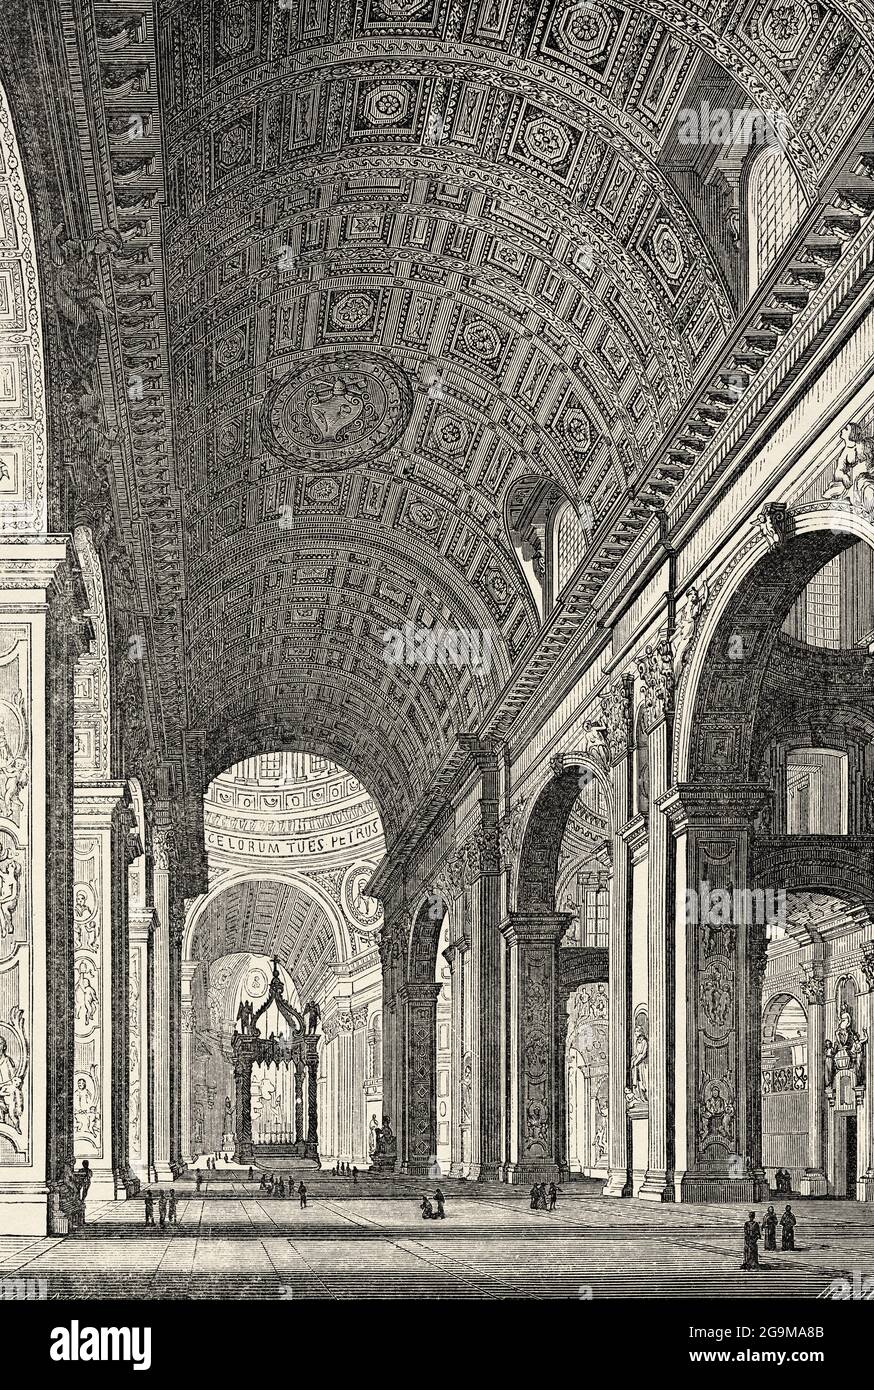 Renaissance architecture. Basilica of St Peter, Rome. Italy. Old 19th century engraved illustration from Jesus Christ by Veuillot 1881 Stock Photo